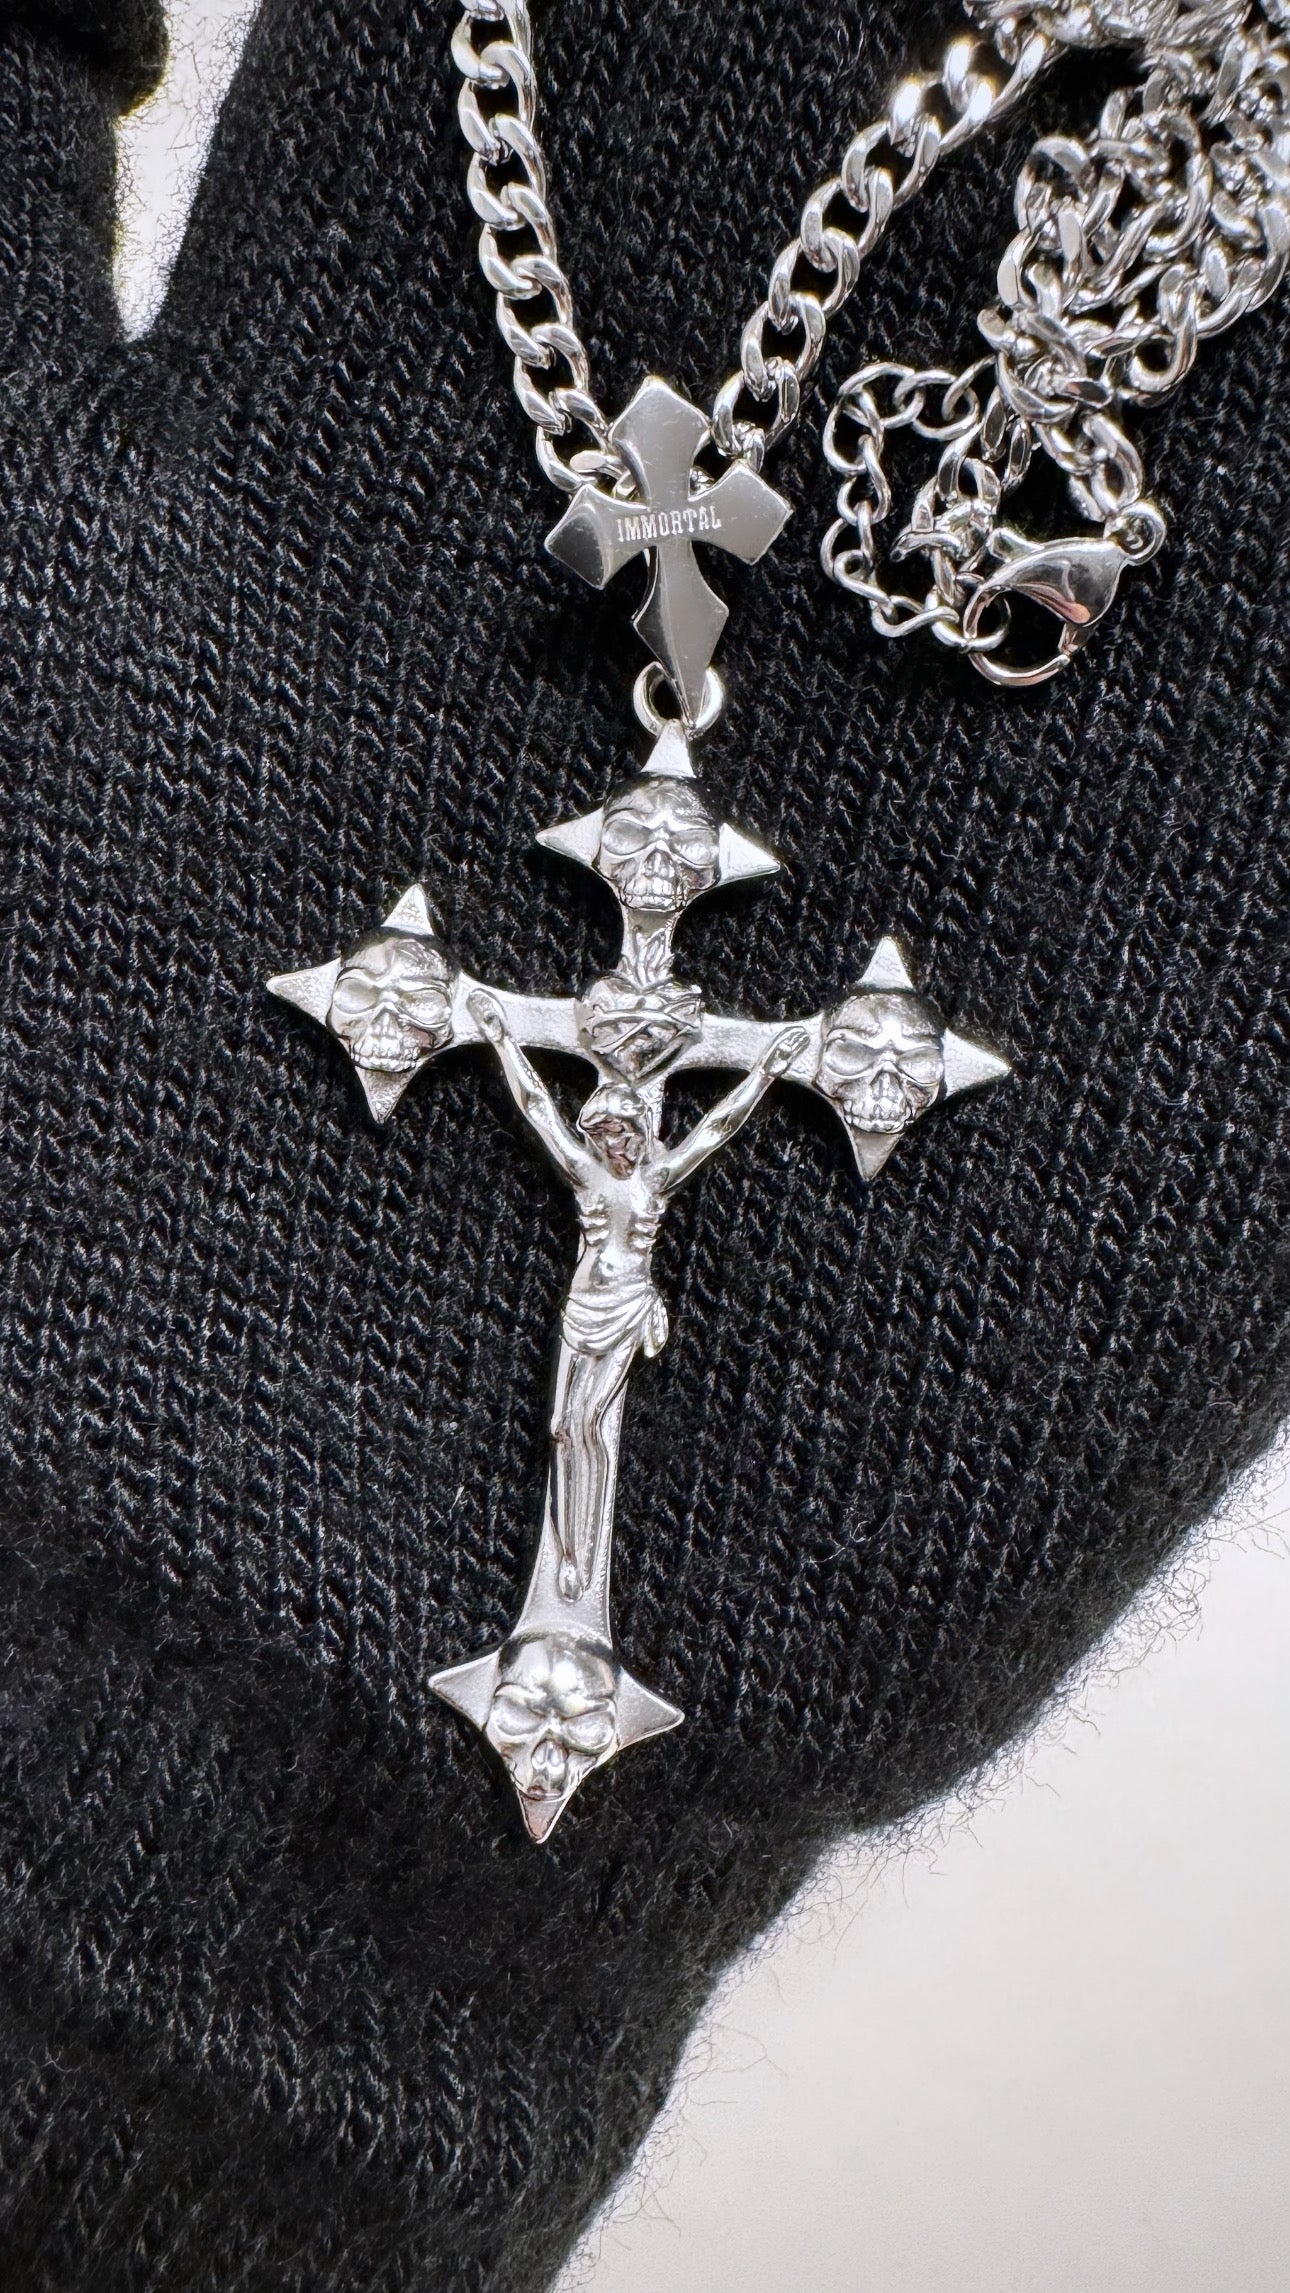 Crucifix pendant with skulls and chain necklace by immortal jewelry